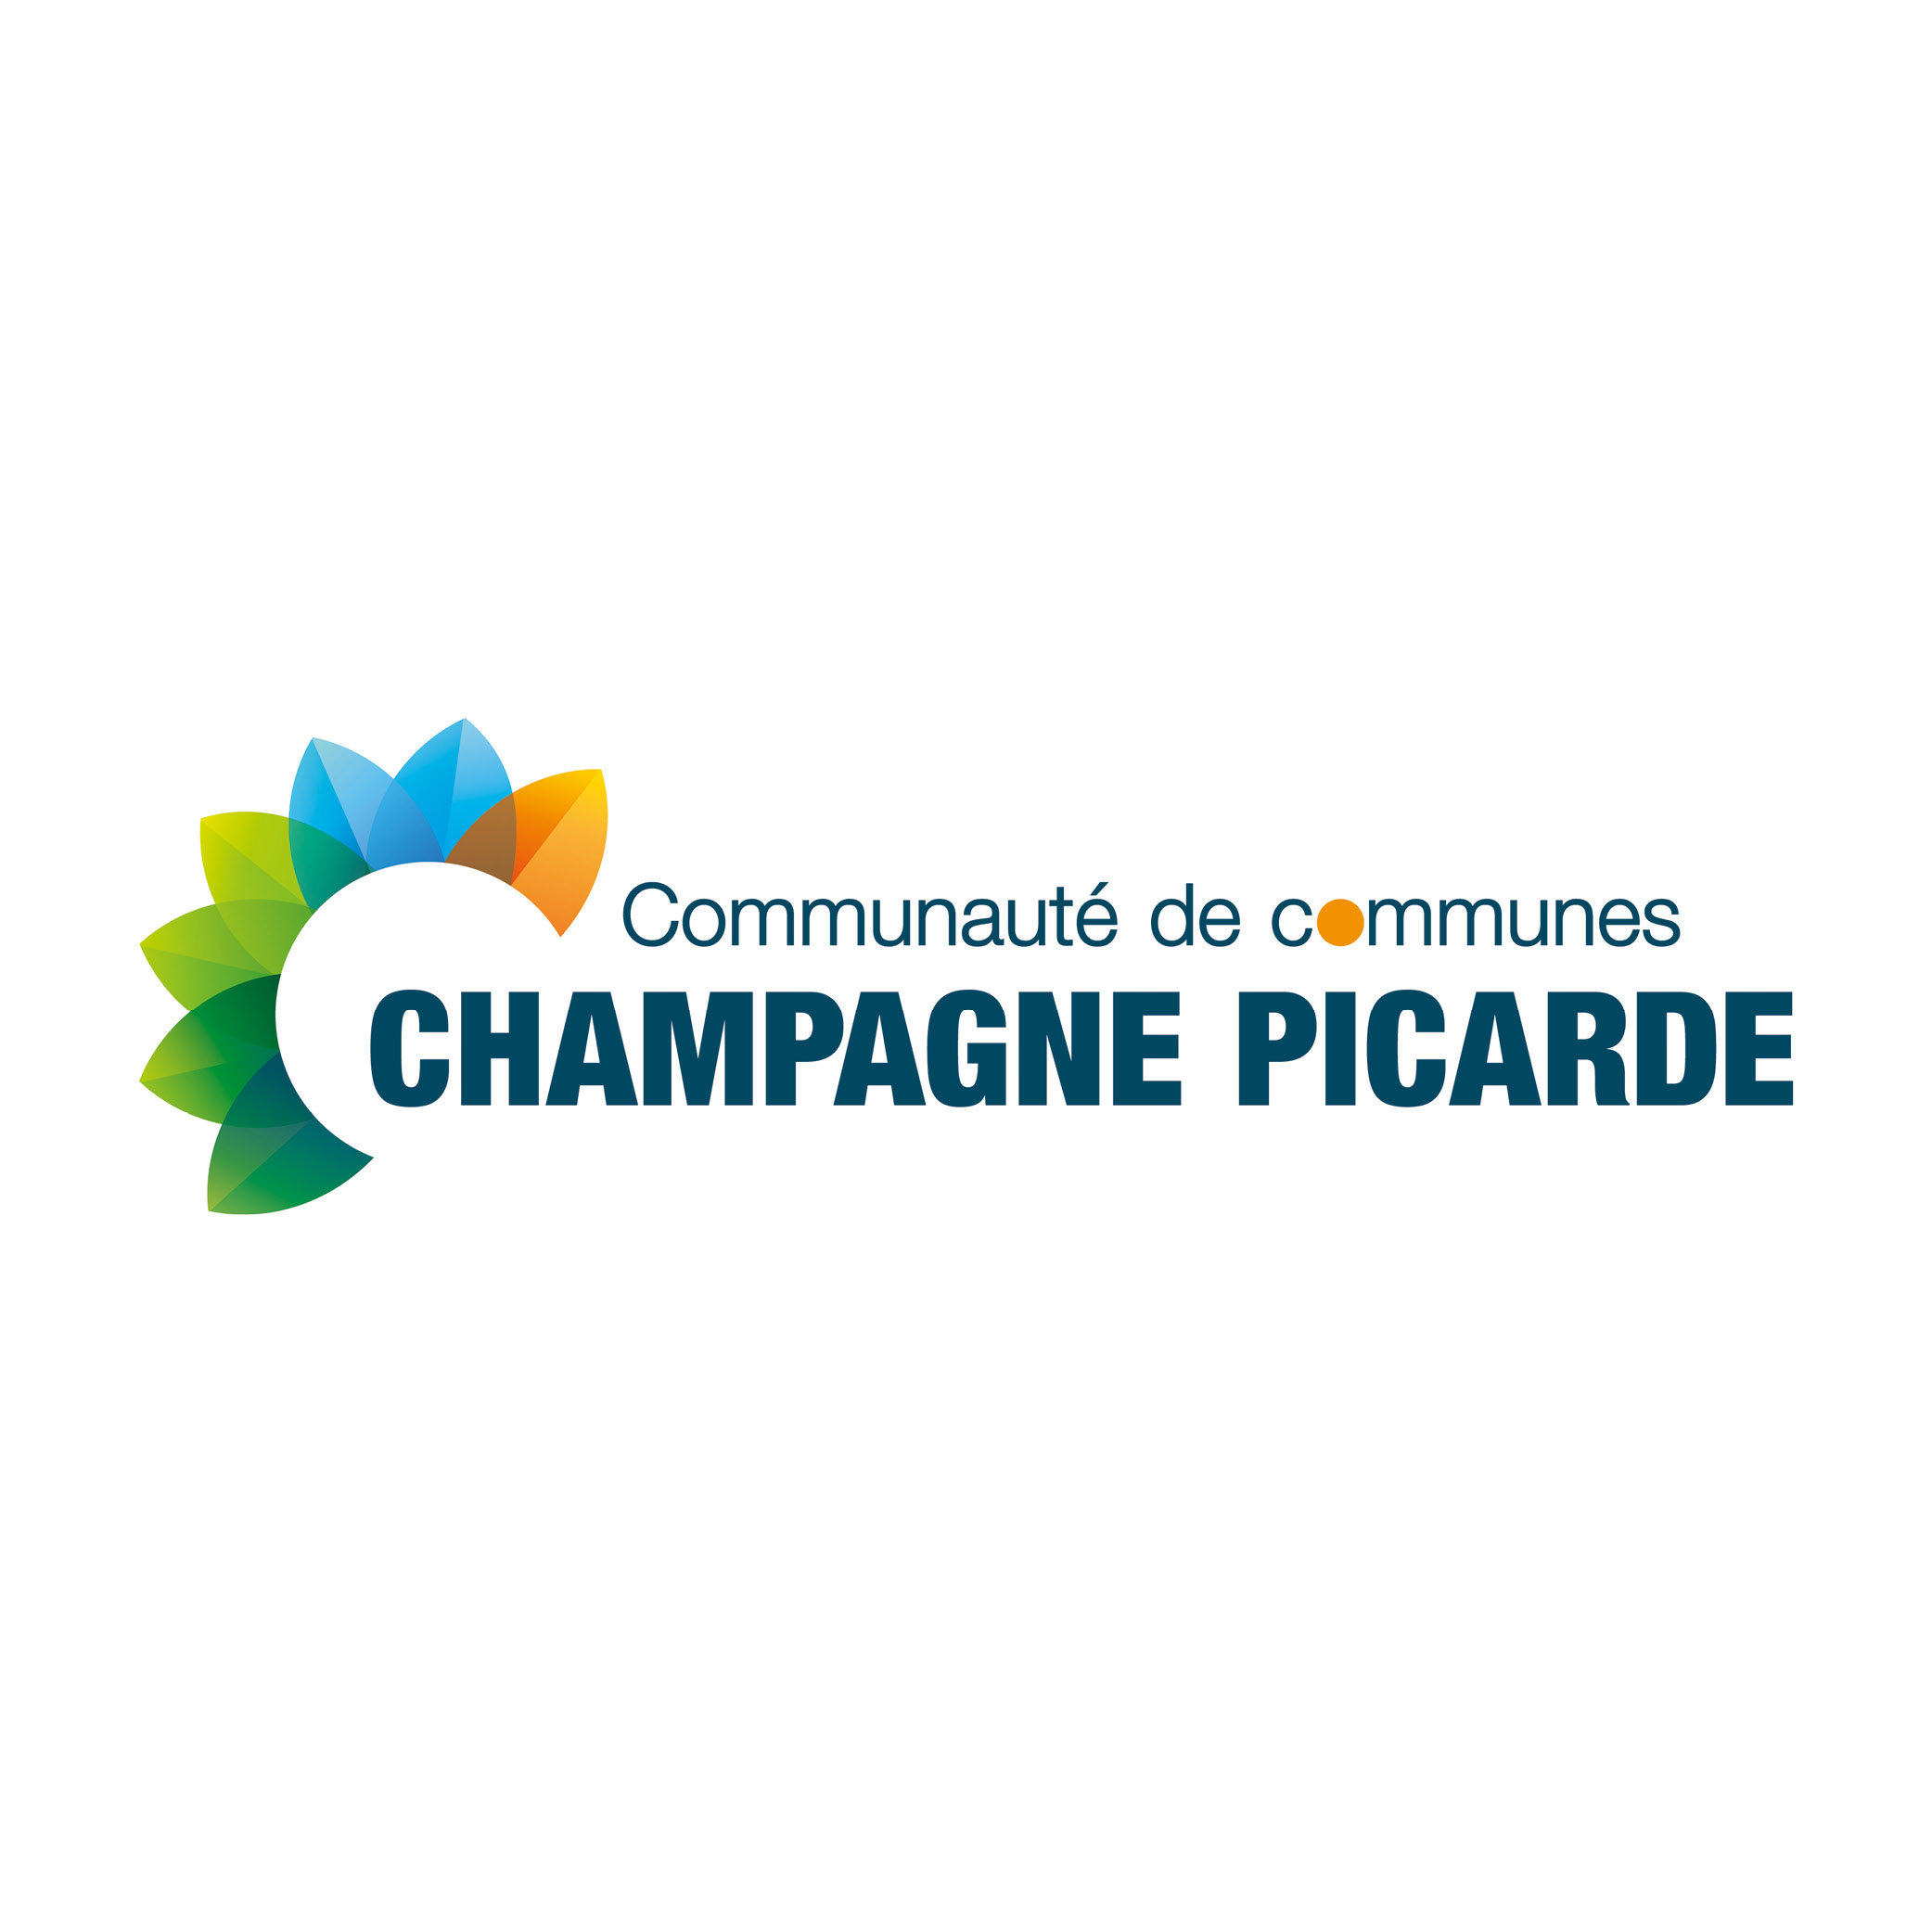 Champagne picarde